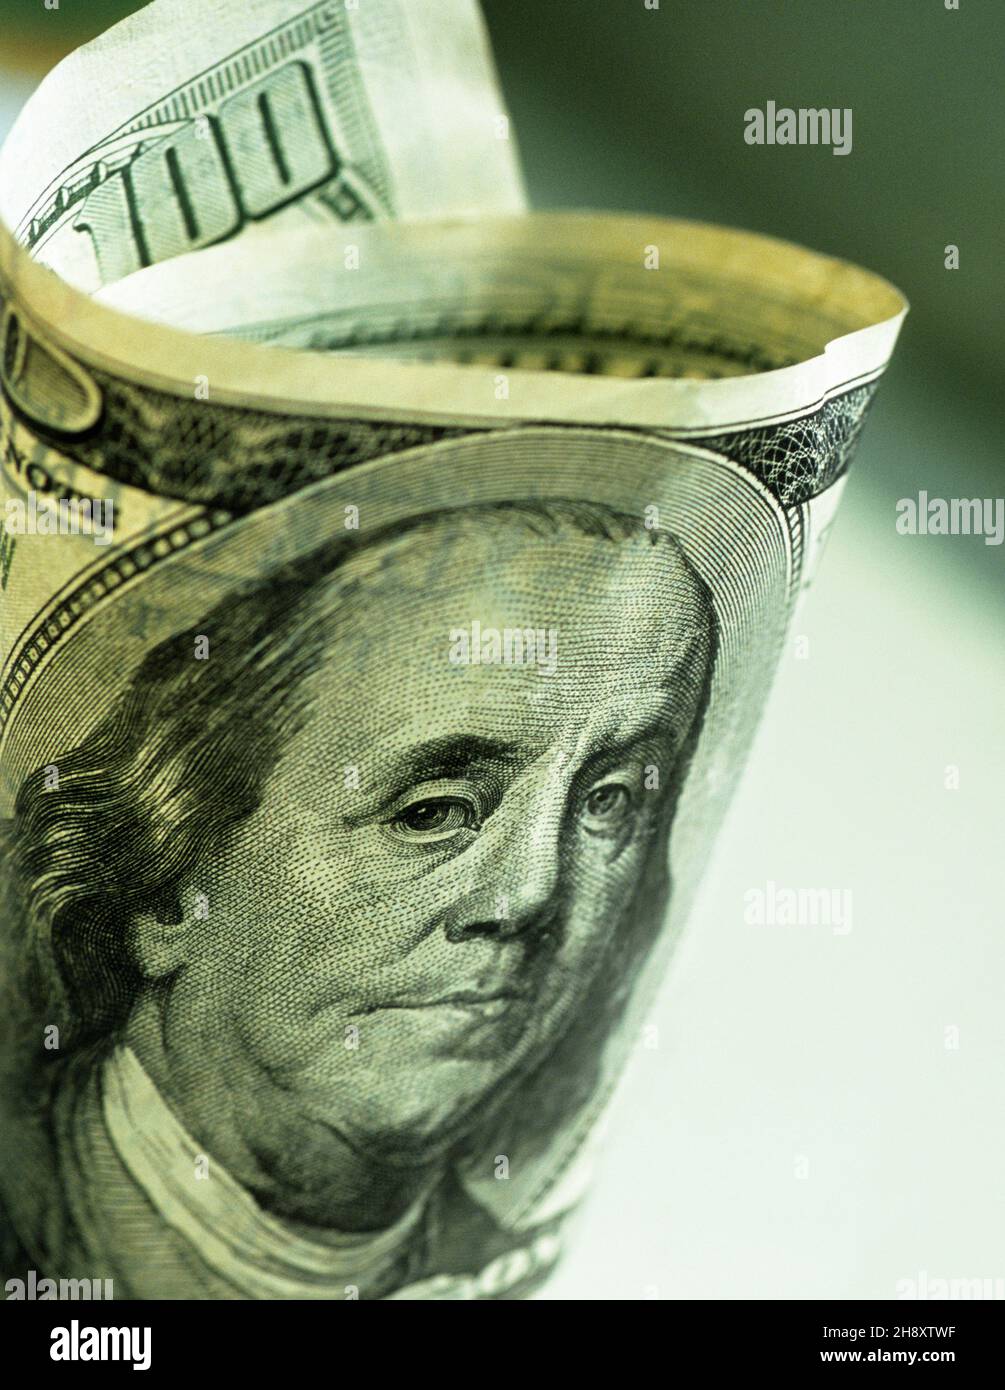 $100 dollar bill, Benjamin Franklin portrait. US banknote. Cash money. American currency. One hundred dollar bill rolled up. Copy space Stock Photo